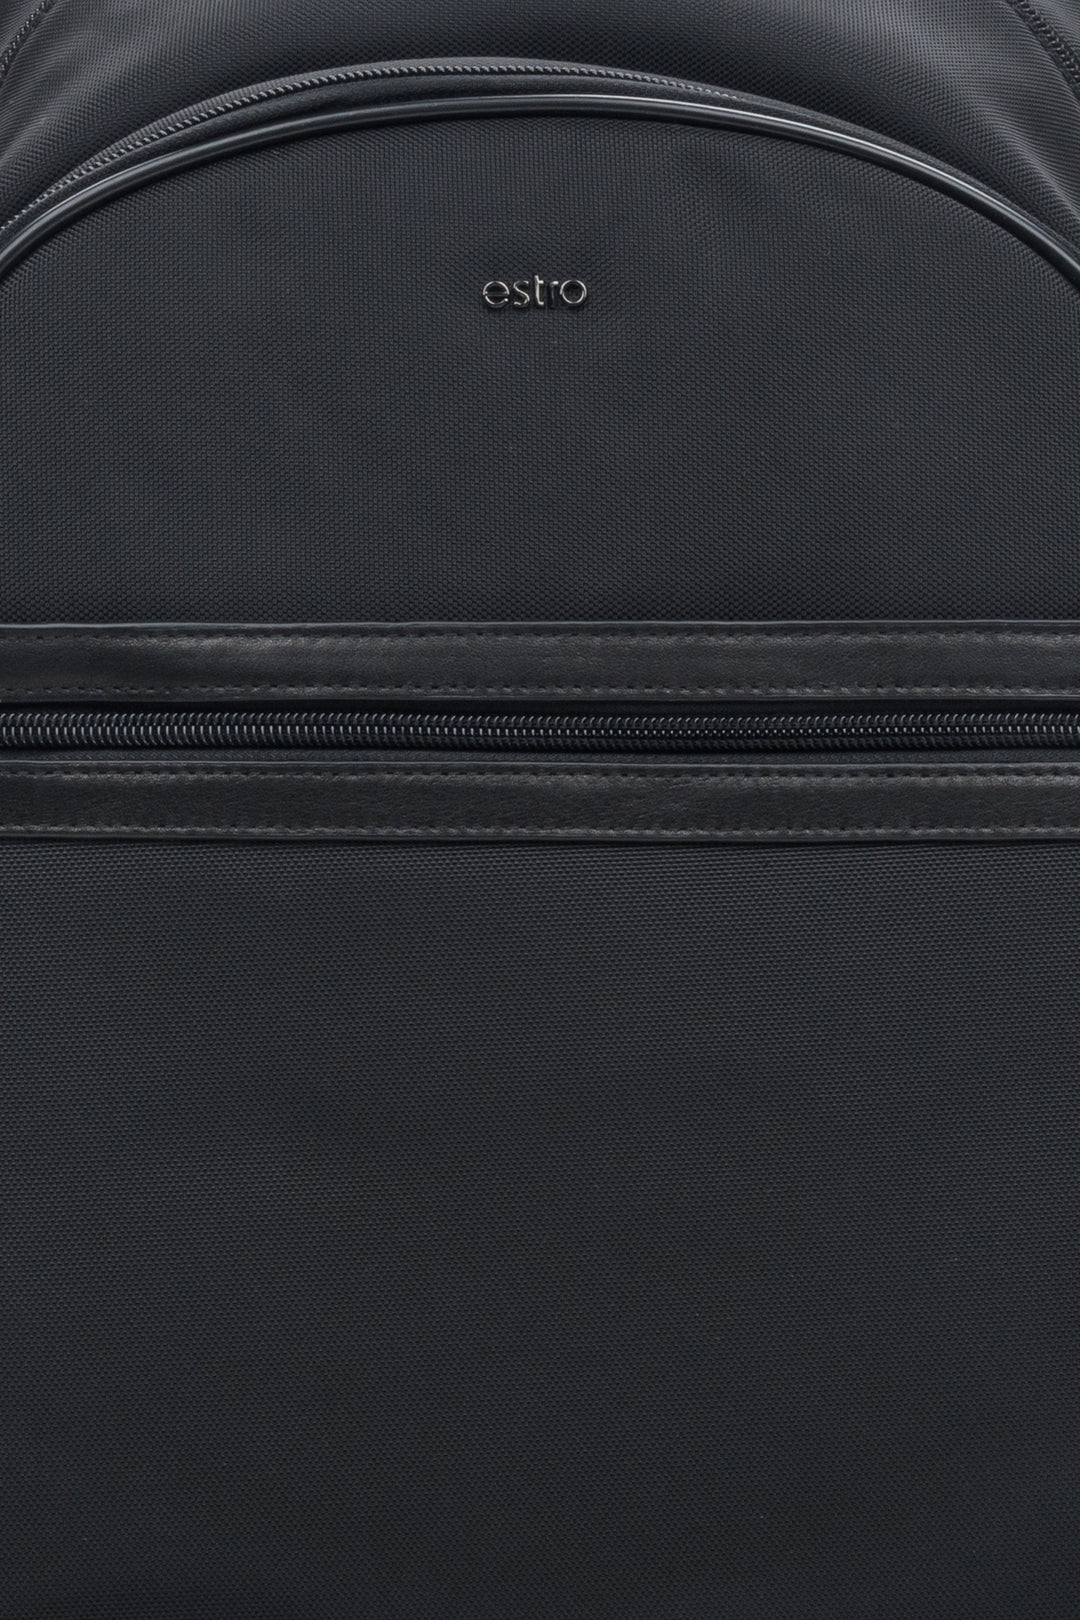  A men's black backpack by Estro - close-up on the details.